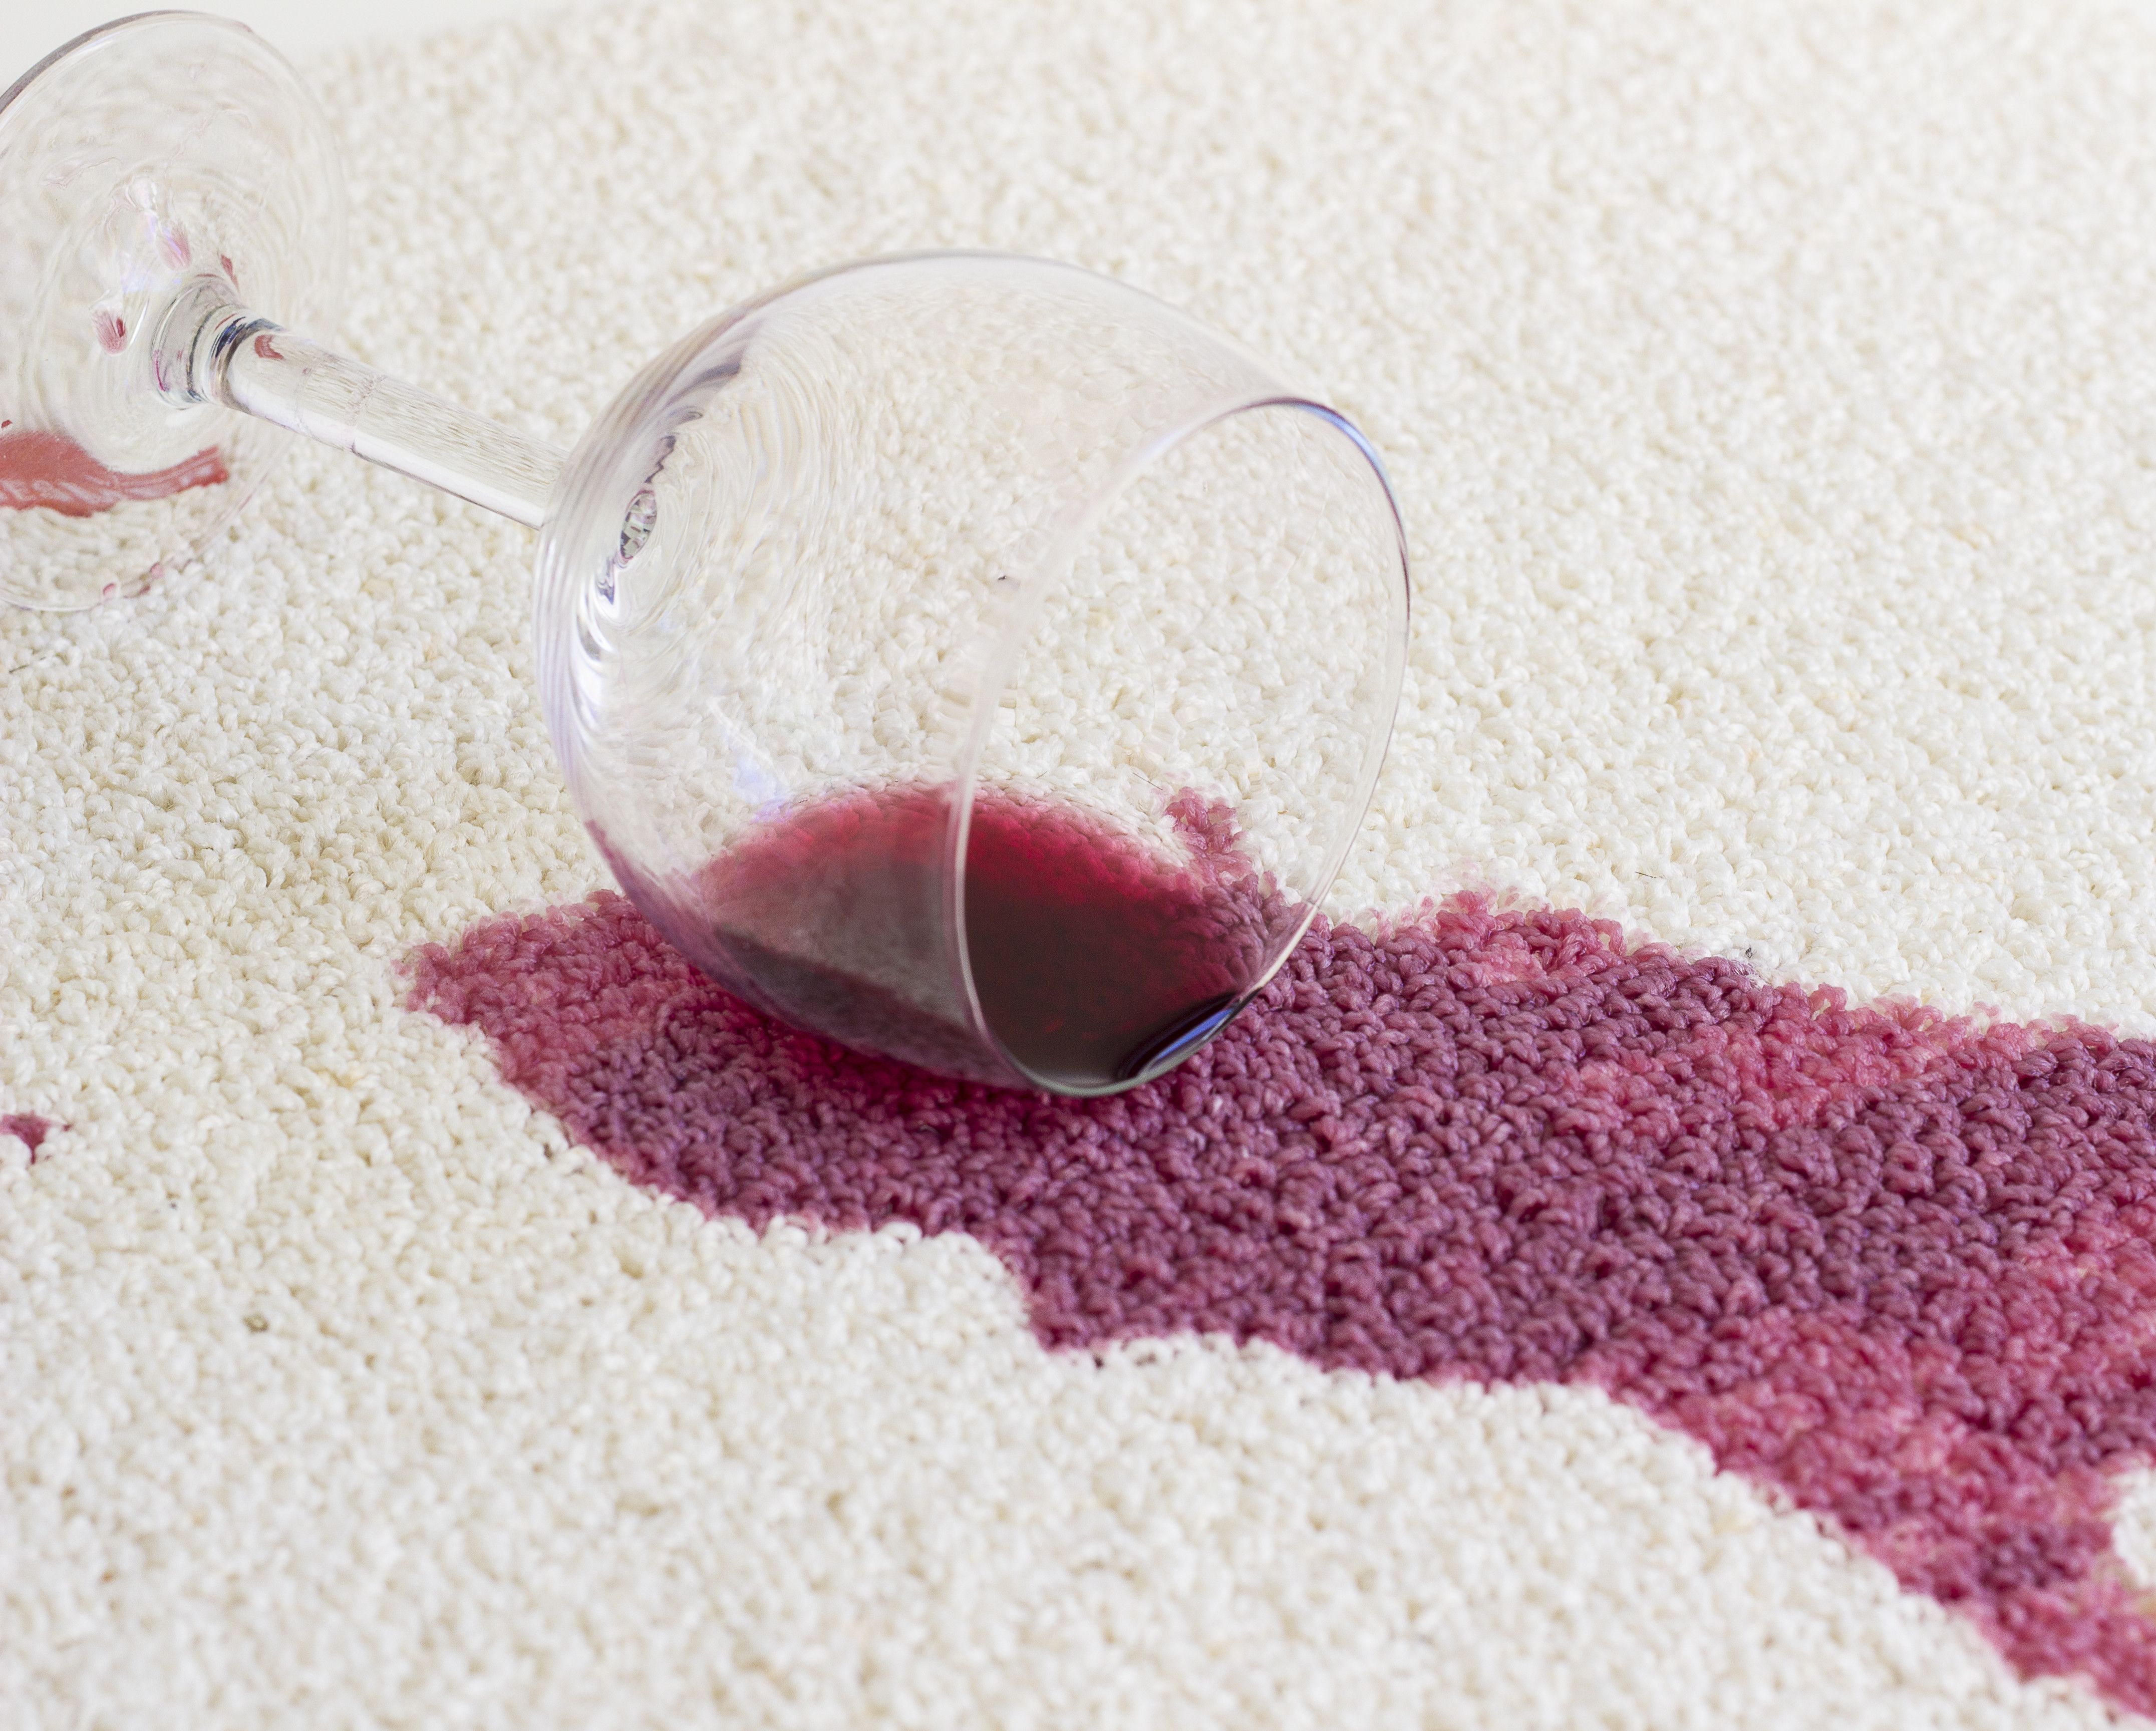 How To Clean Red Wine Stains Get Out Of Carpet Clothes